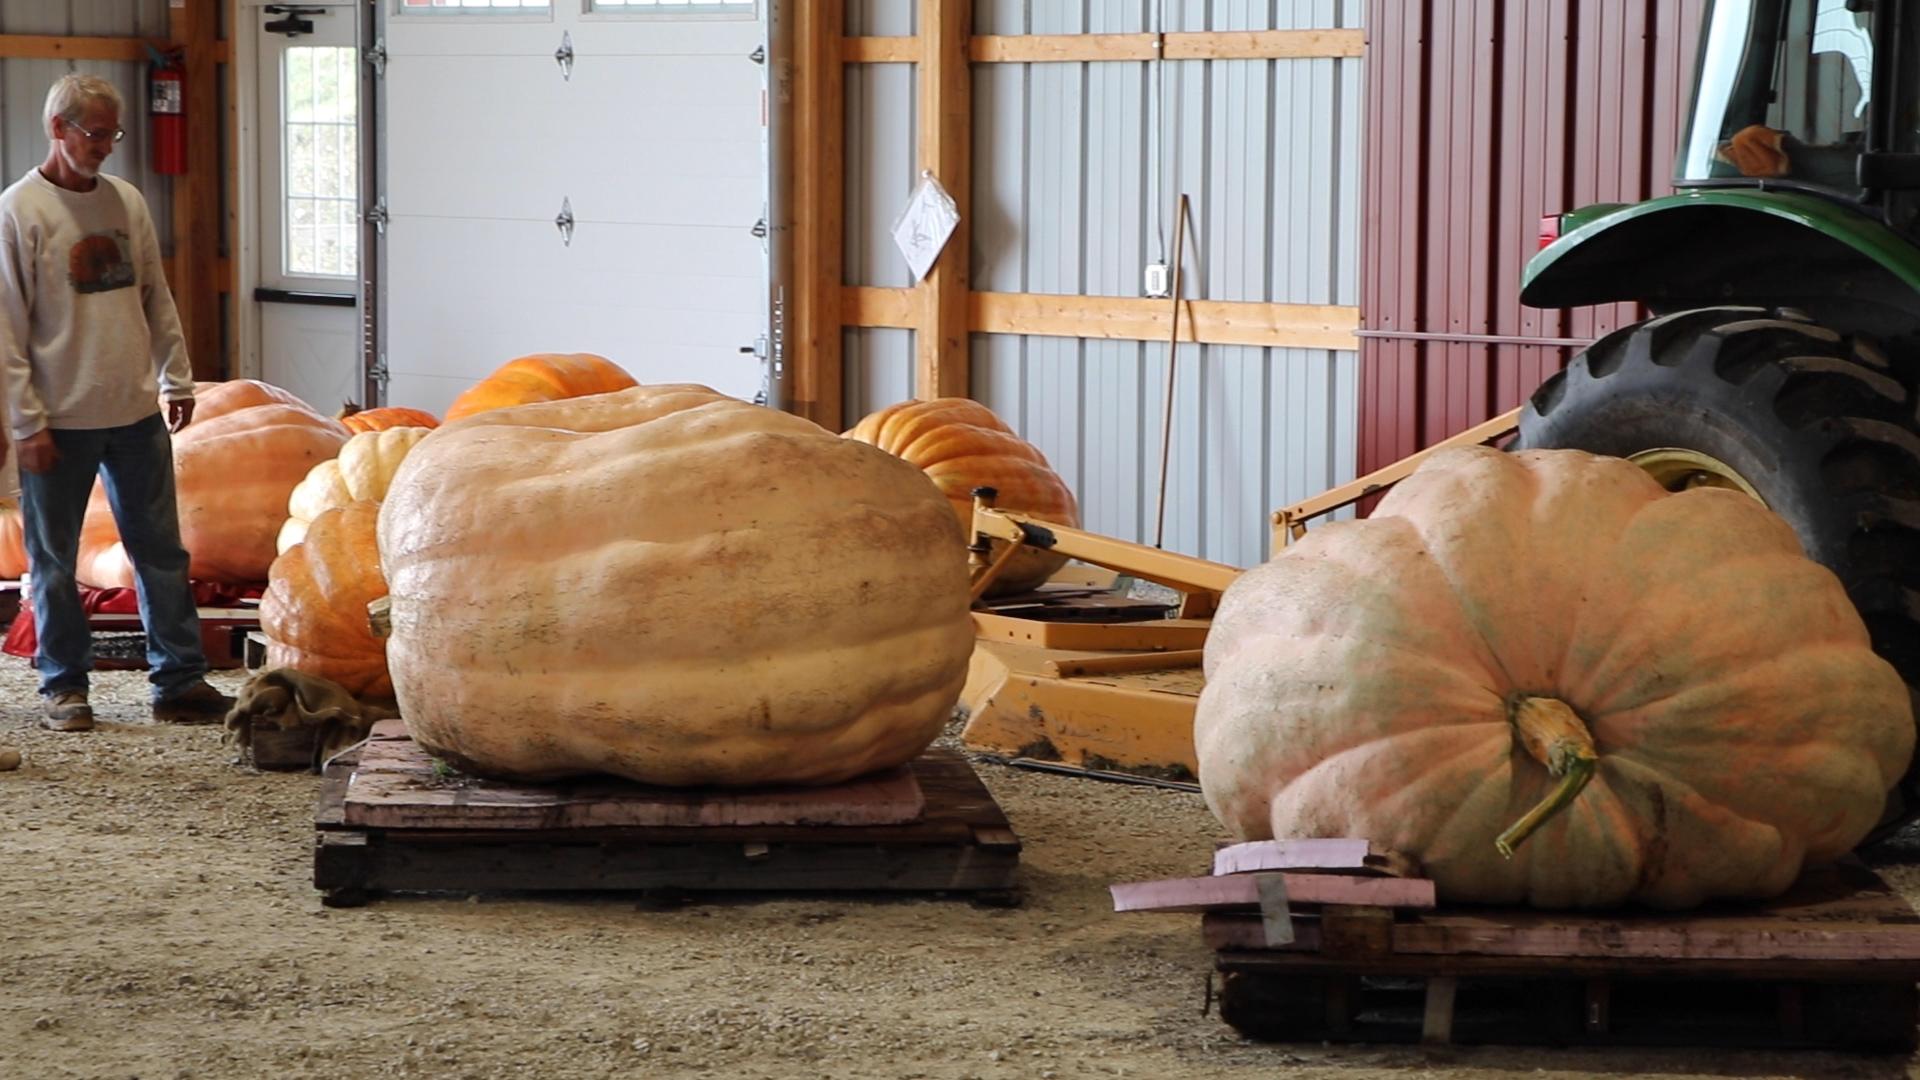 Giant pumpkins are lined up before they’re weighed at Heap’s Giant Pumpkin Farm in Minooka, Illinois. (Evan Garcia / WTTW News)